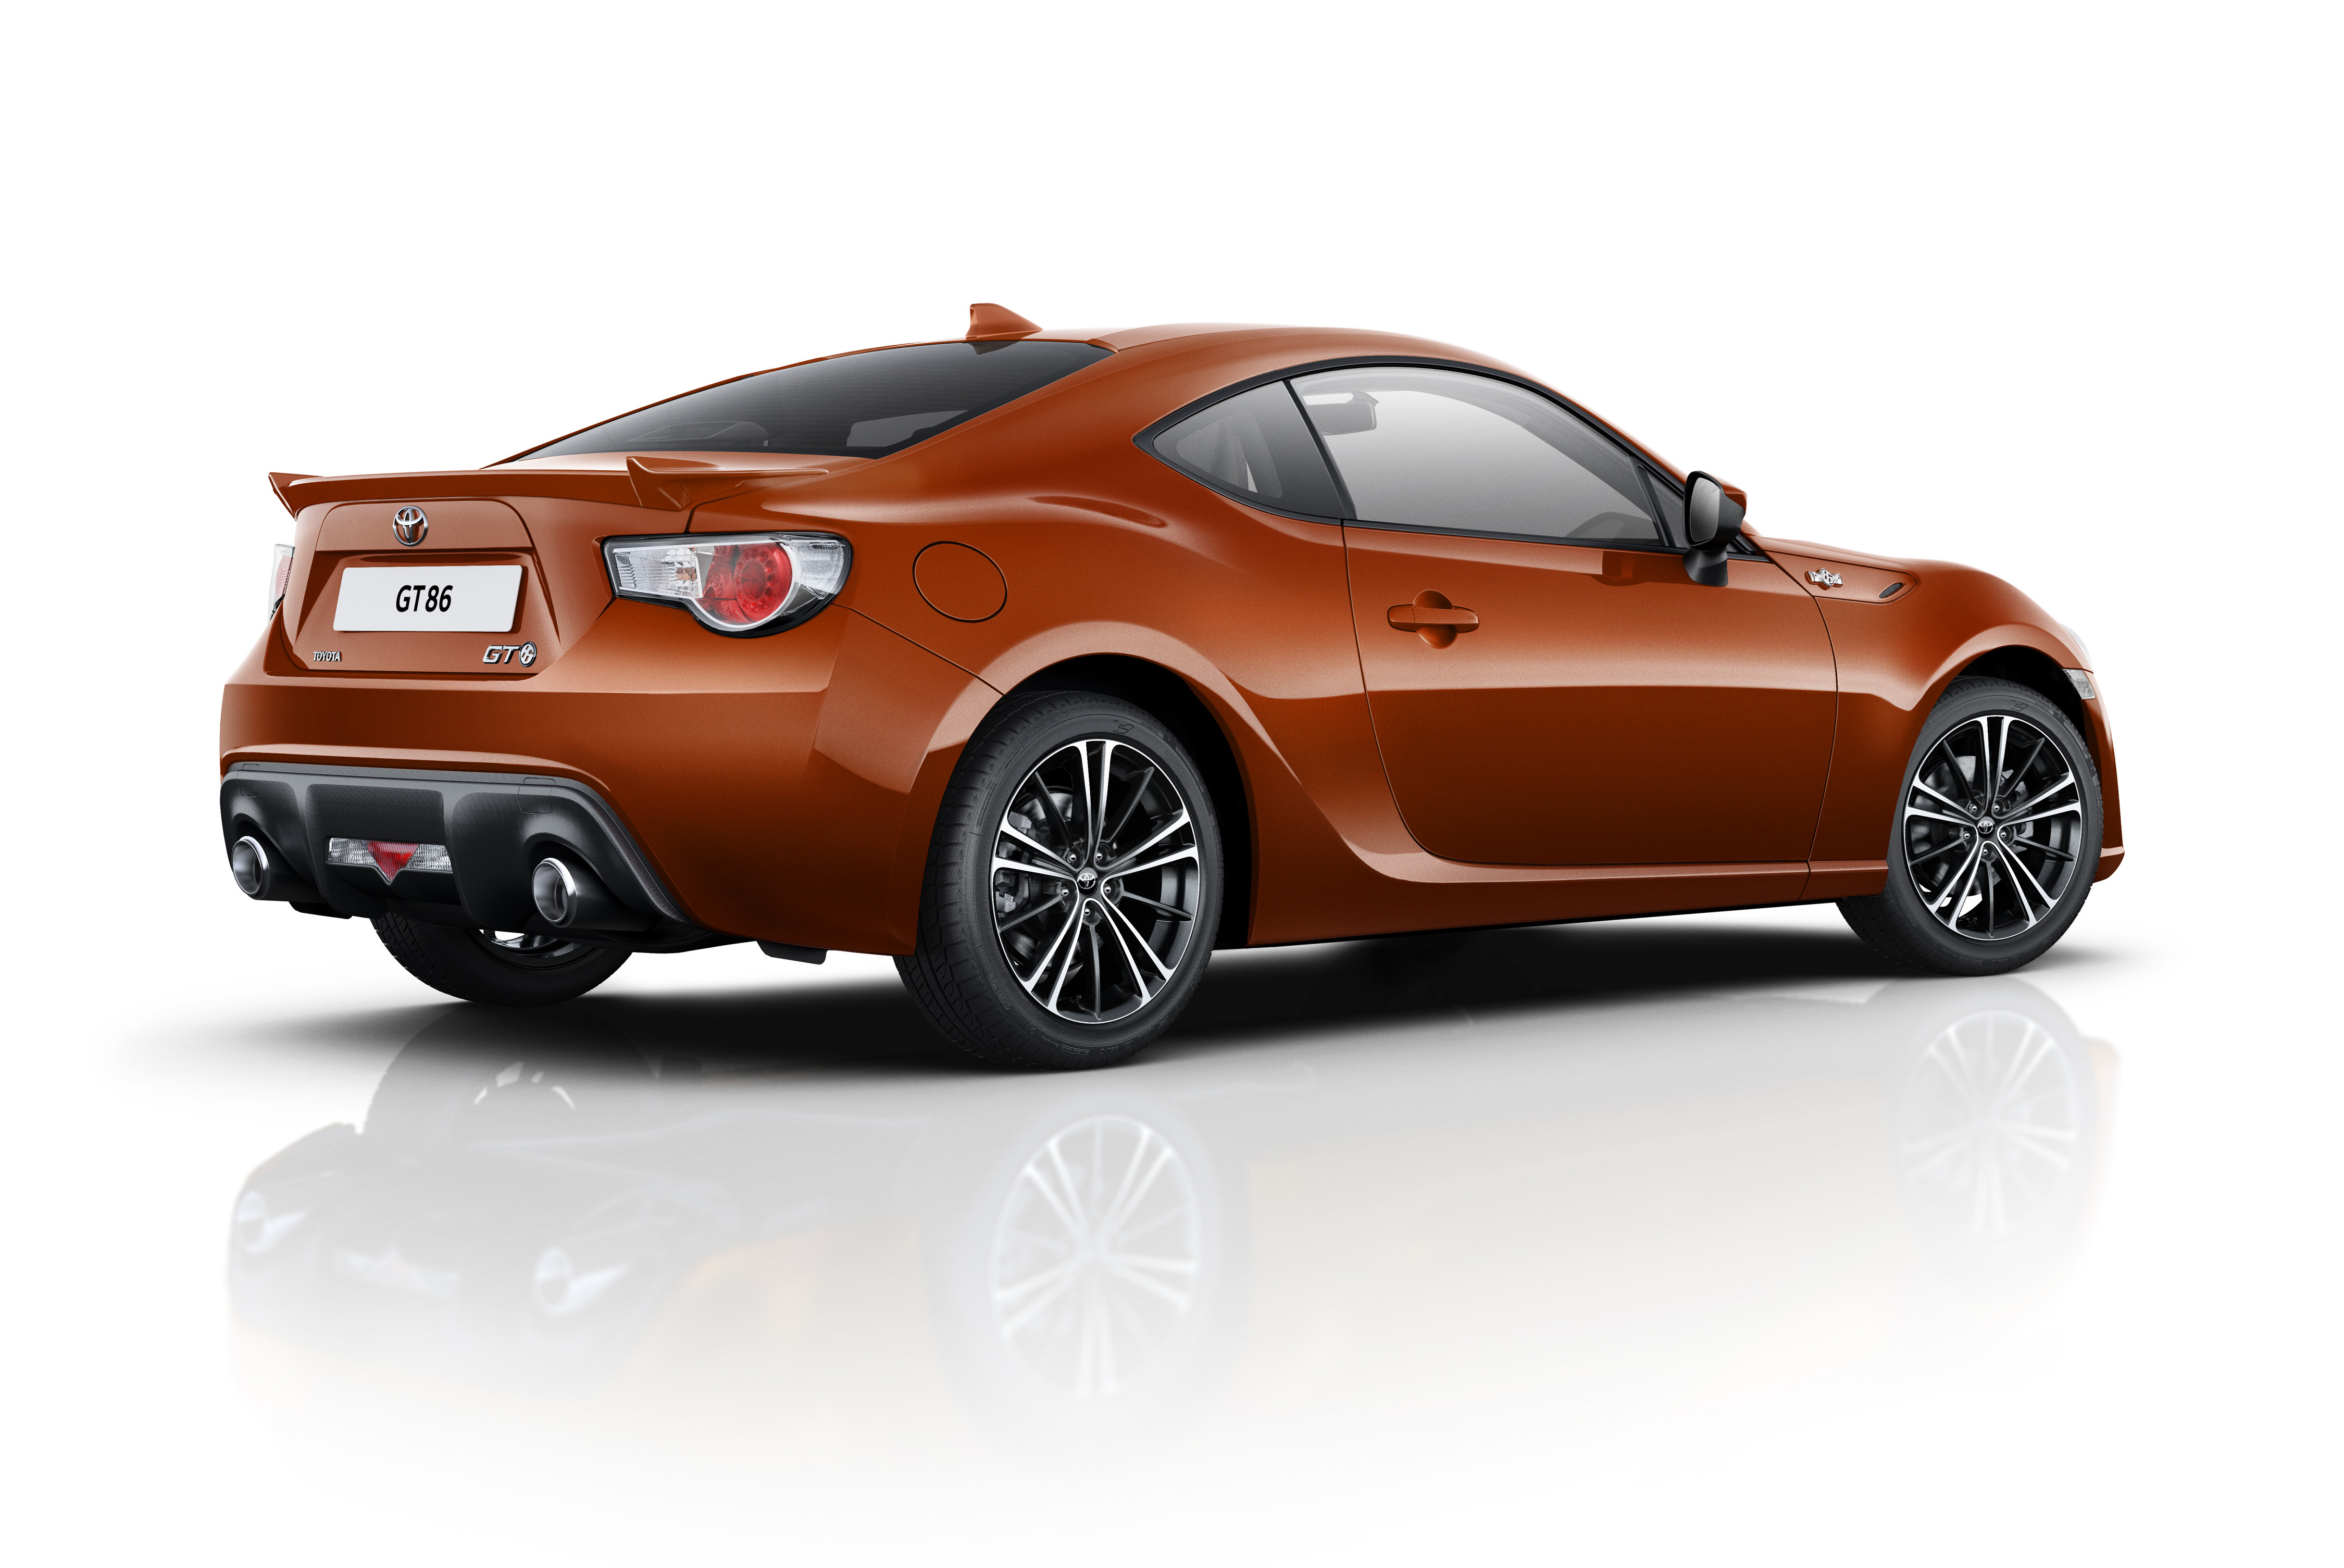 New models and lower price for Toyota GT86